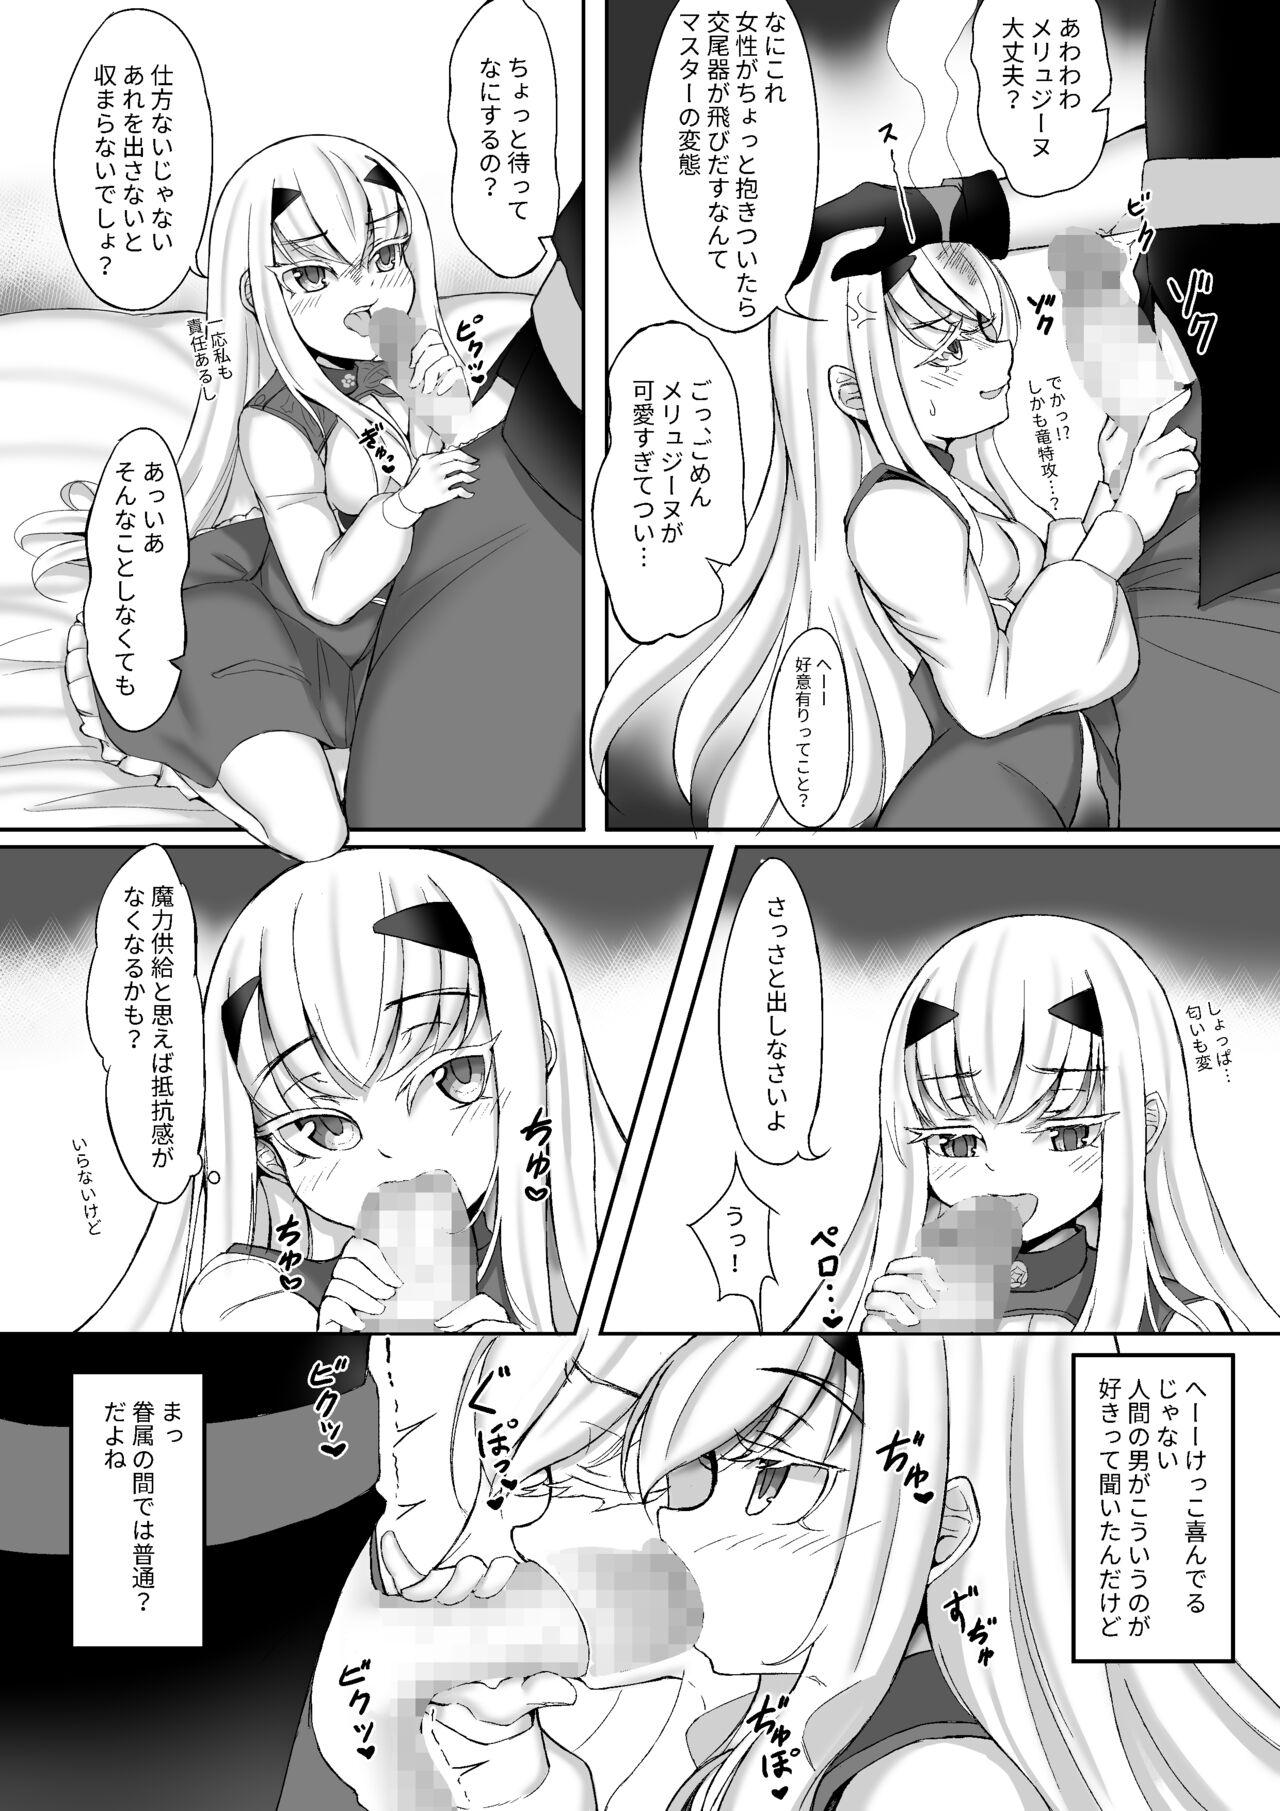 Passion FujiMelu Maryoku Kyoukyuu Love One Another - Fate grand order Amateur Porno - Page 9